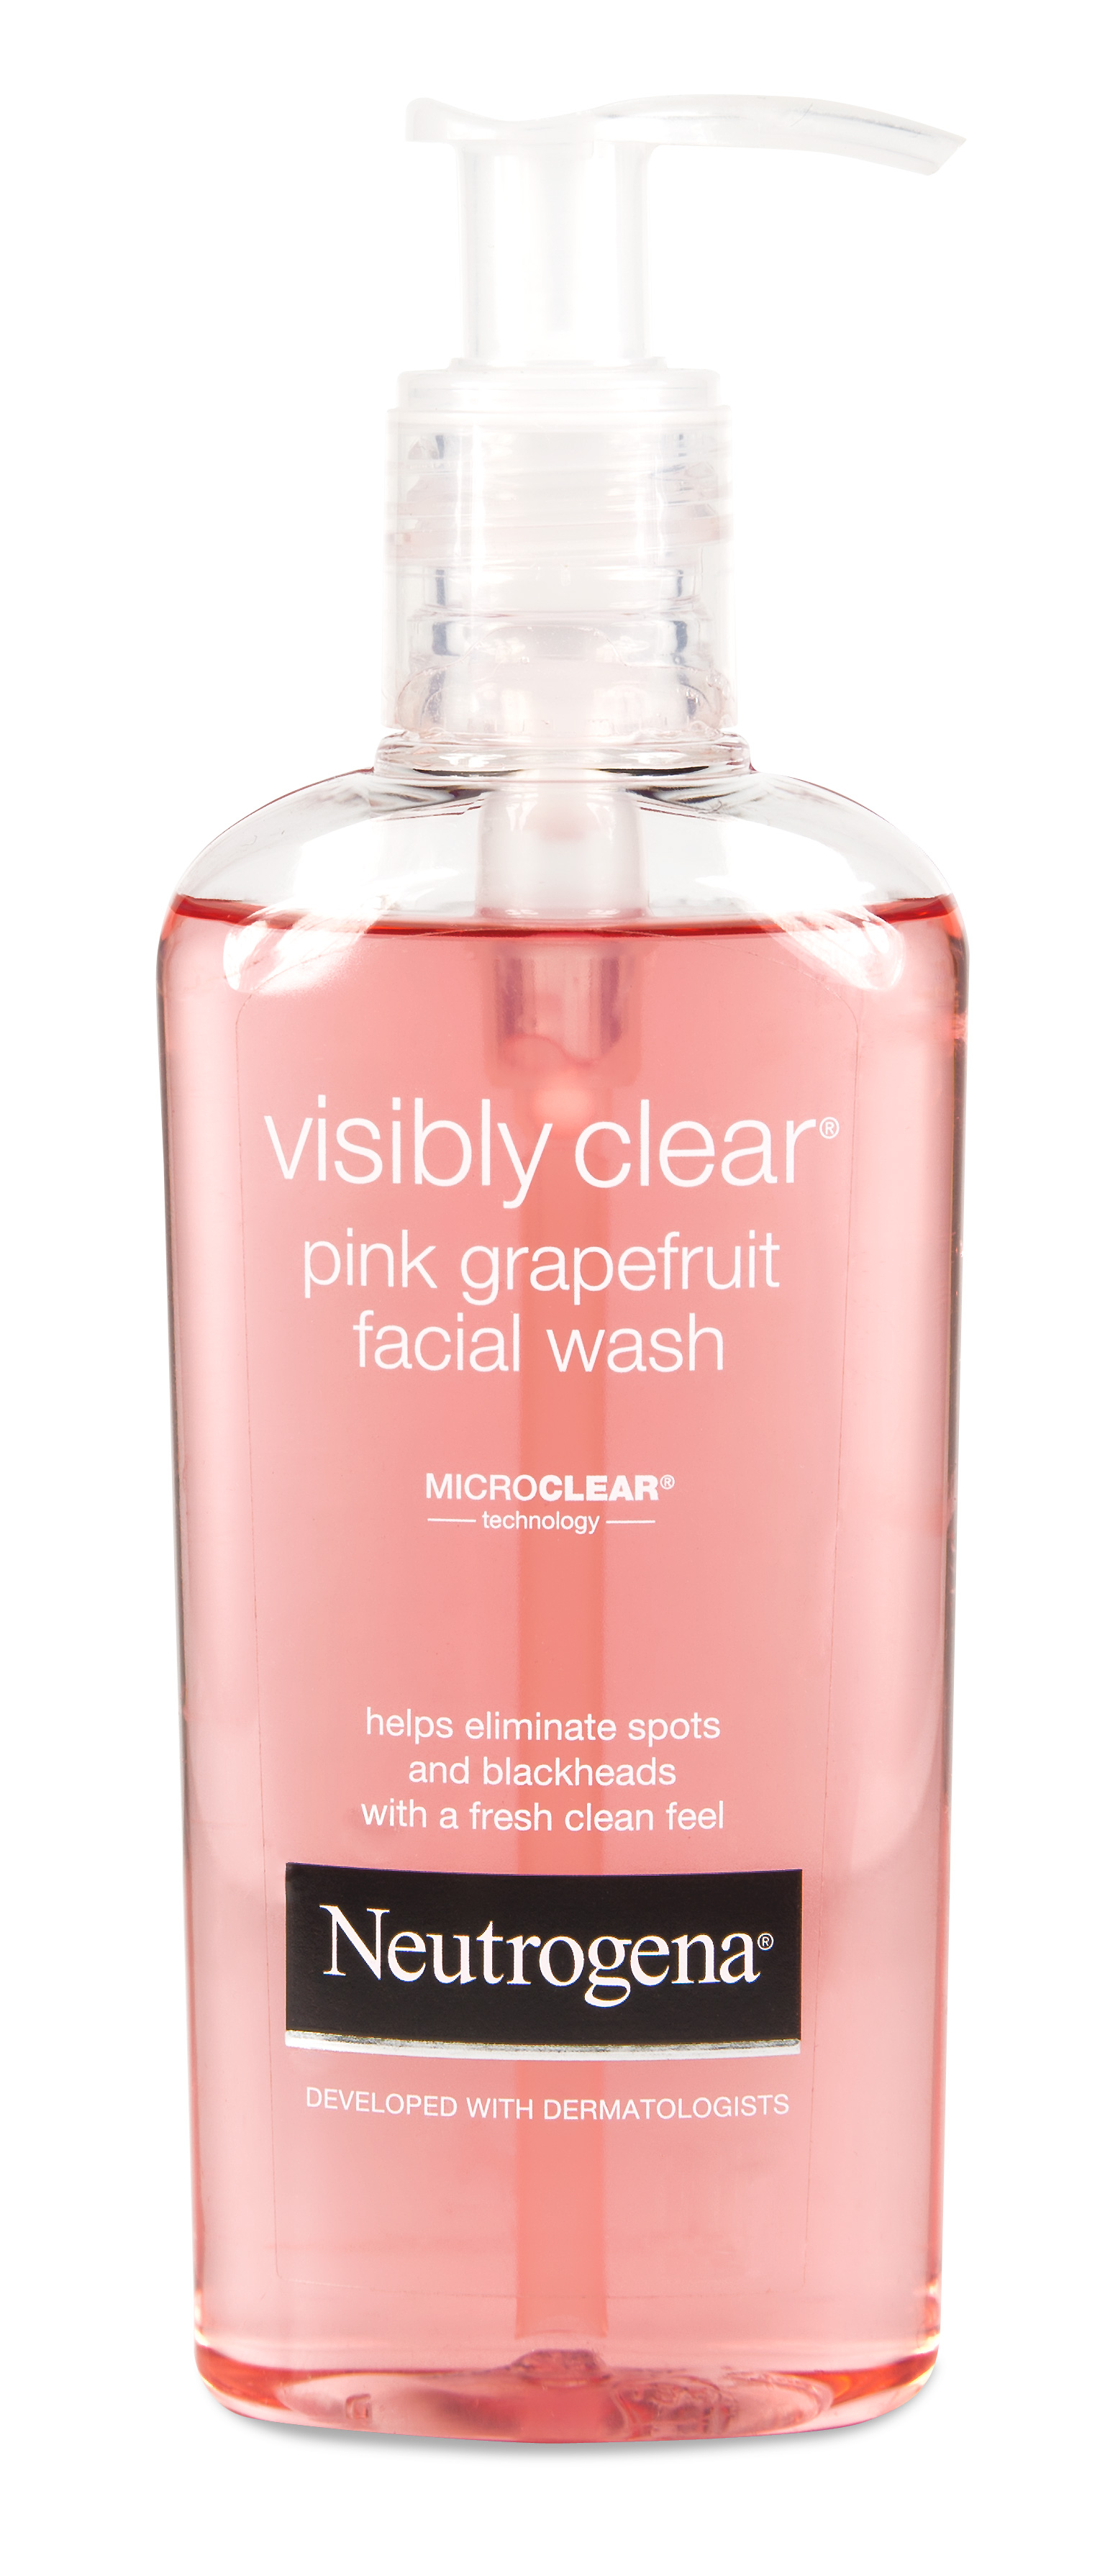 NOWY VisiblyClear PG Facial Wash bezpleckow